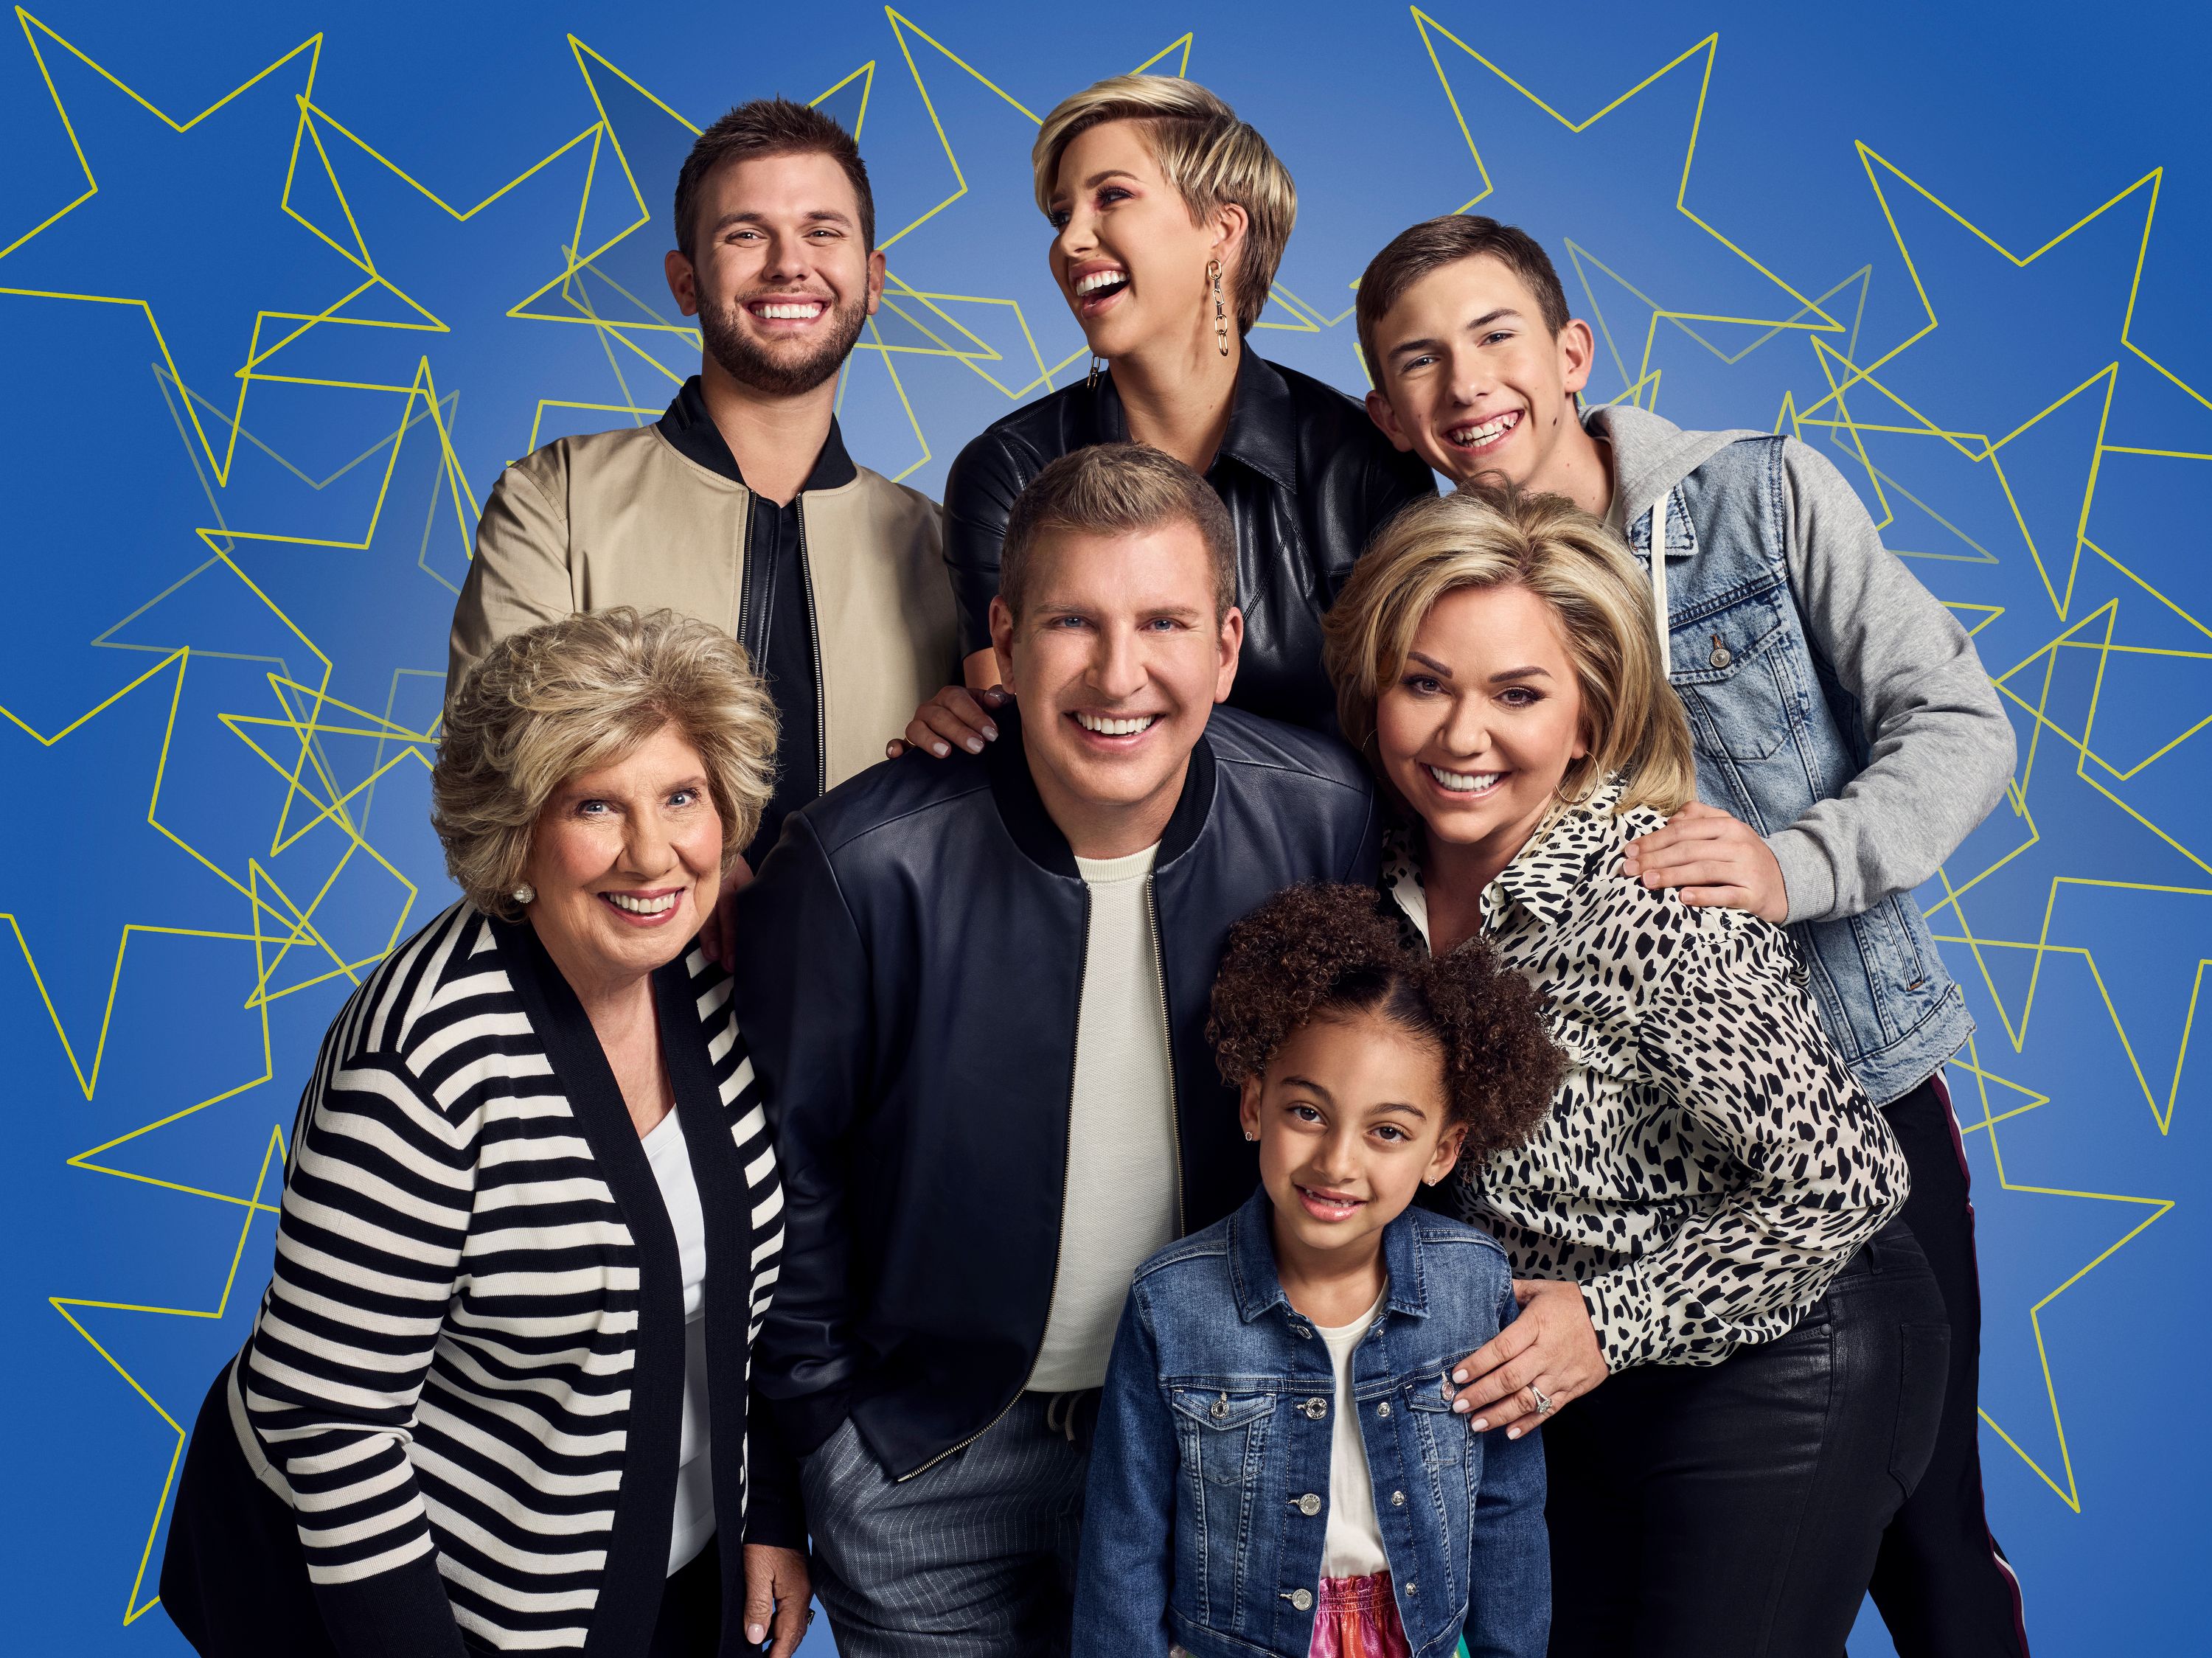 Faye, Chase, Todd, Savannah, Chloe, Julie, and Grayson Chrisley in a season 8 "Chrisley Knows Best" promo image | Photo: Tommy Garcia/USA Network/NBCU Photo Bank/Getty Images